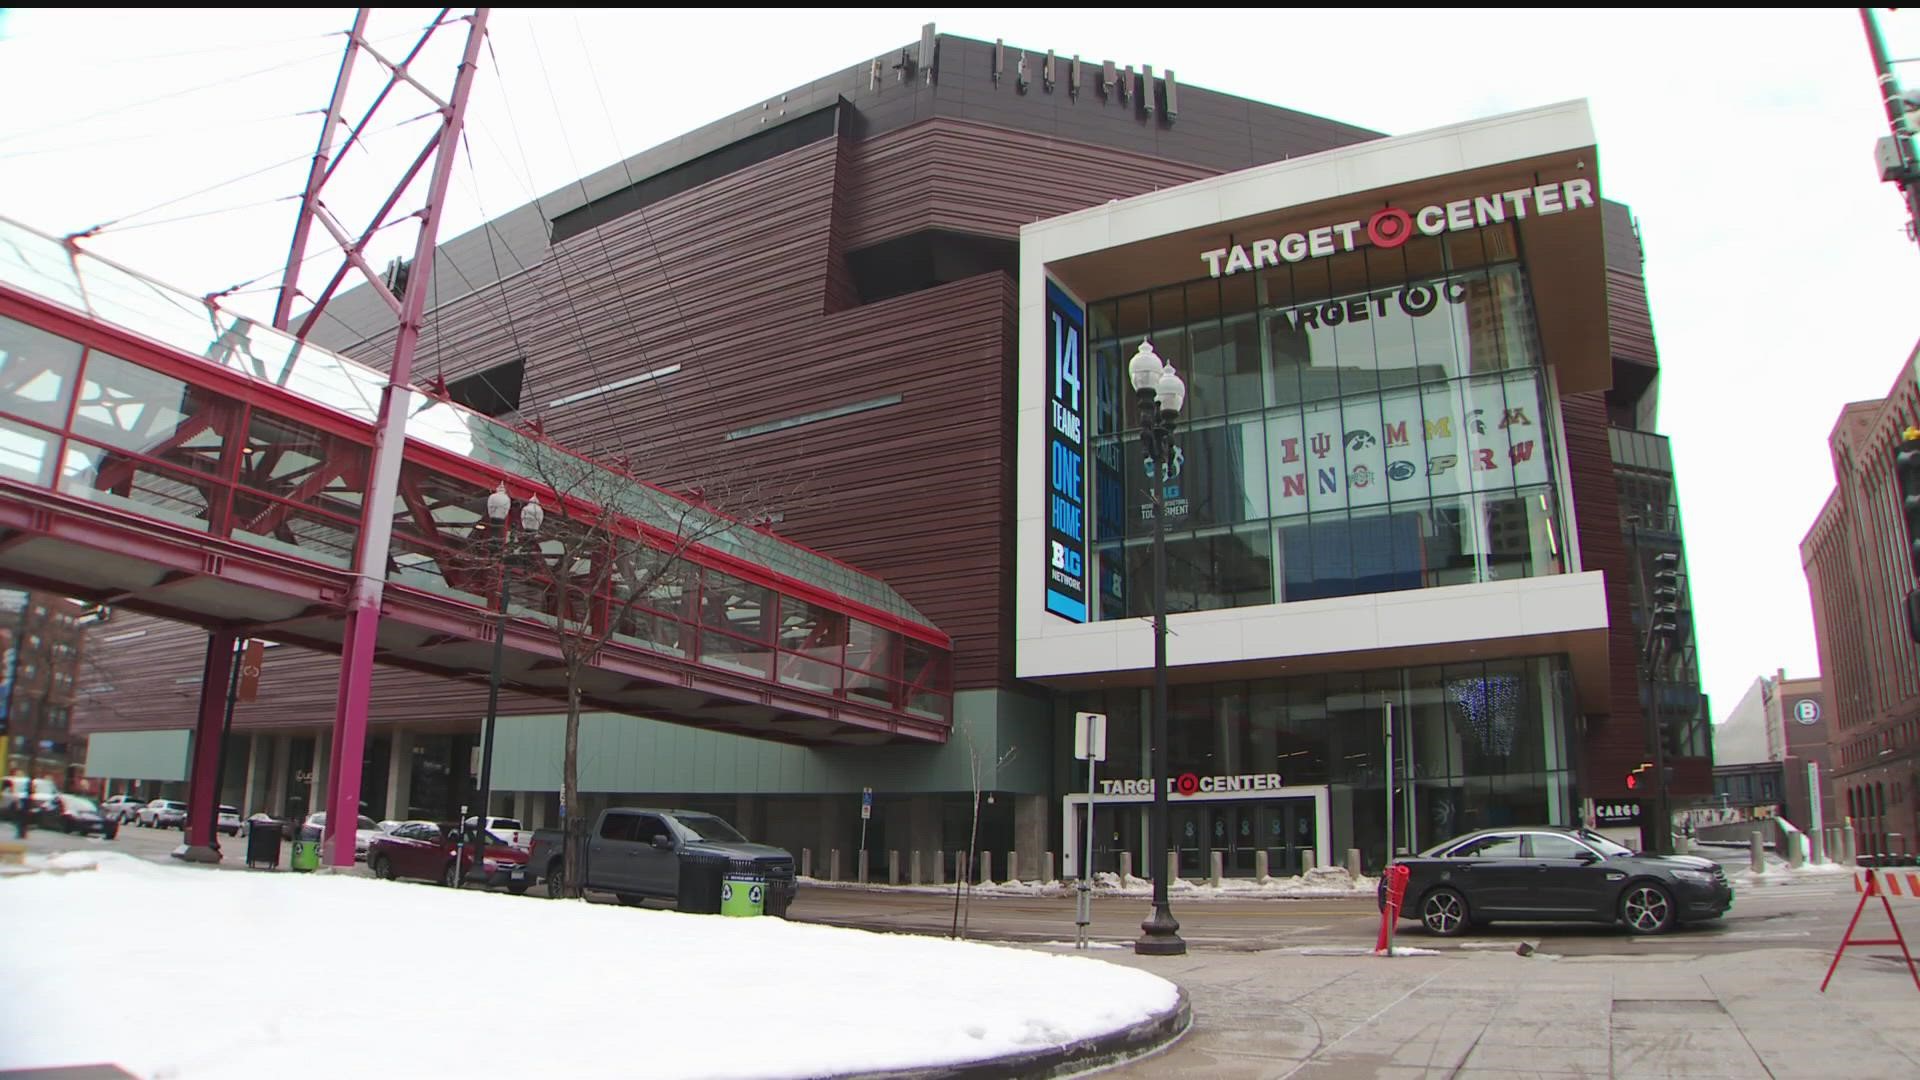 Officials are putting the finishing touches on the Target Center ahead of the tournament this week, which the city of Minneapolis is hosting for the first time.